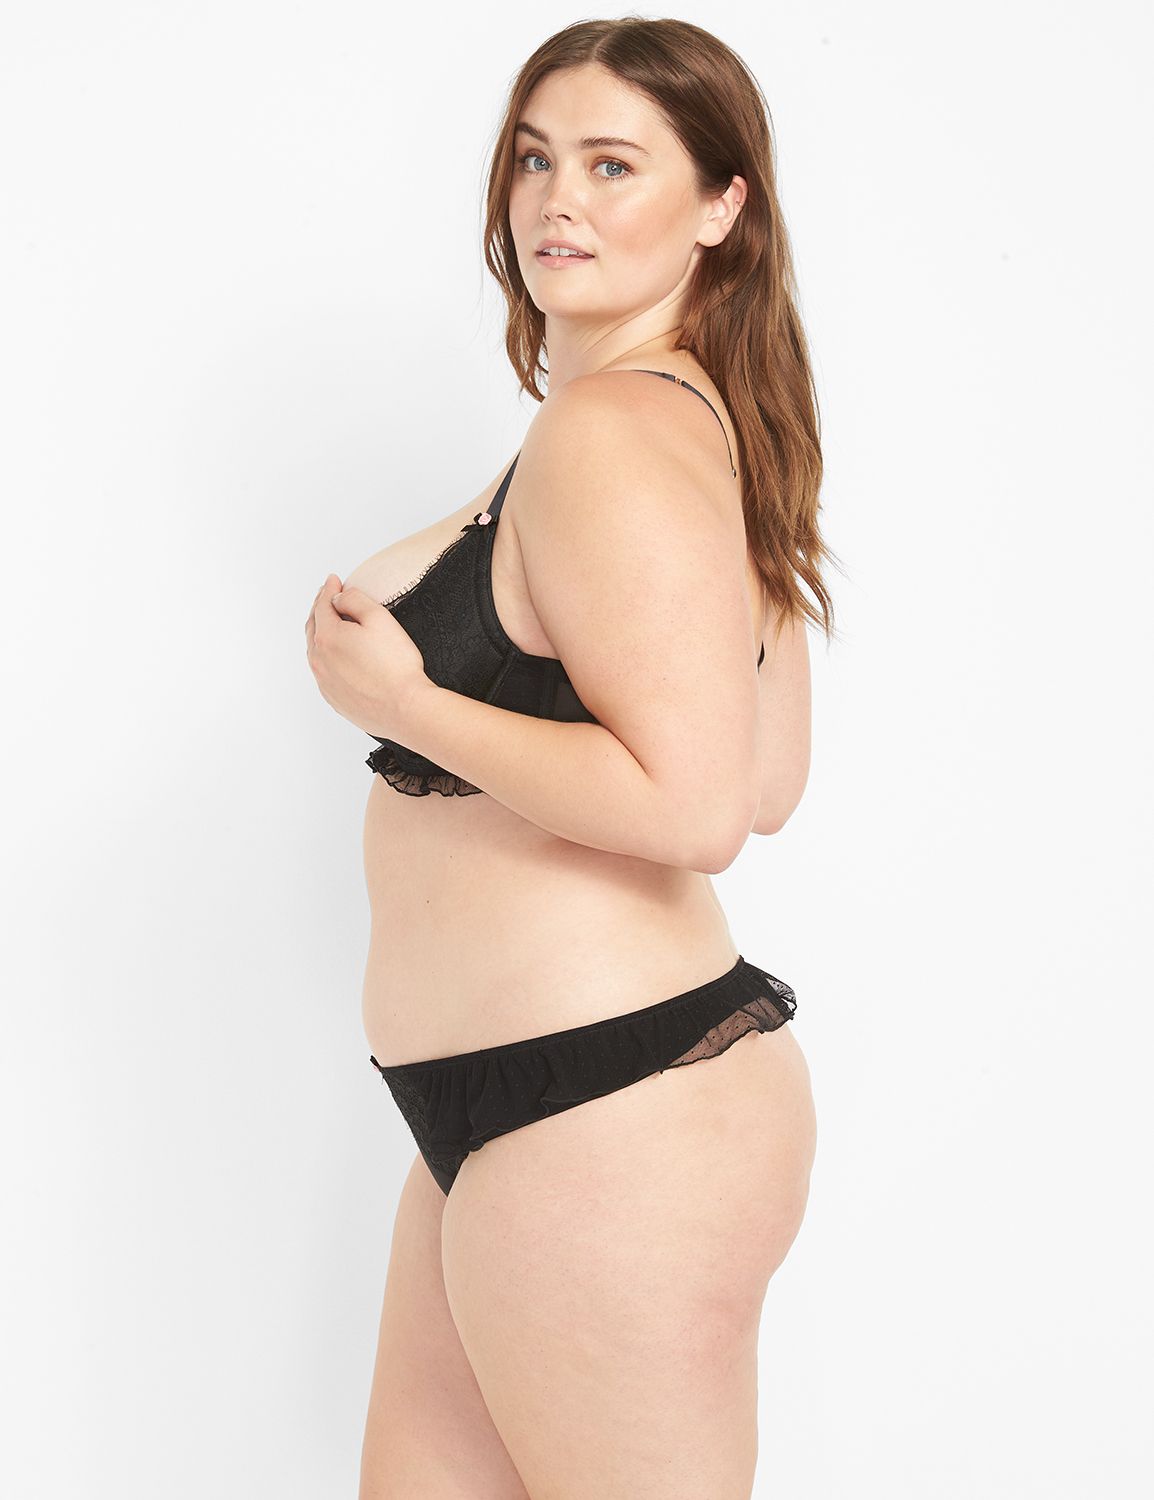 NEW 46D Lane Bryant Cacique Seriously Sexy Quarter Cup Peekaboo